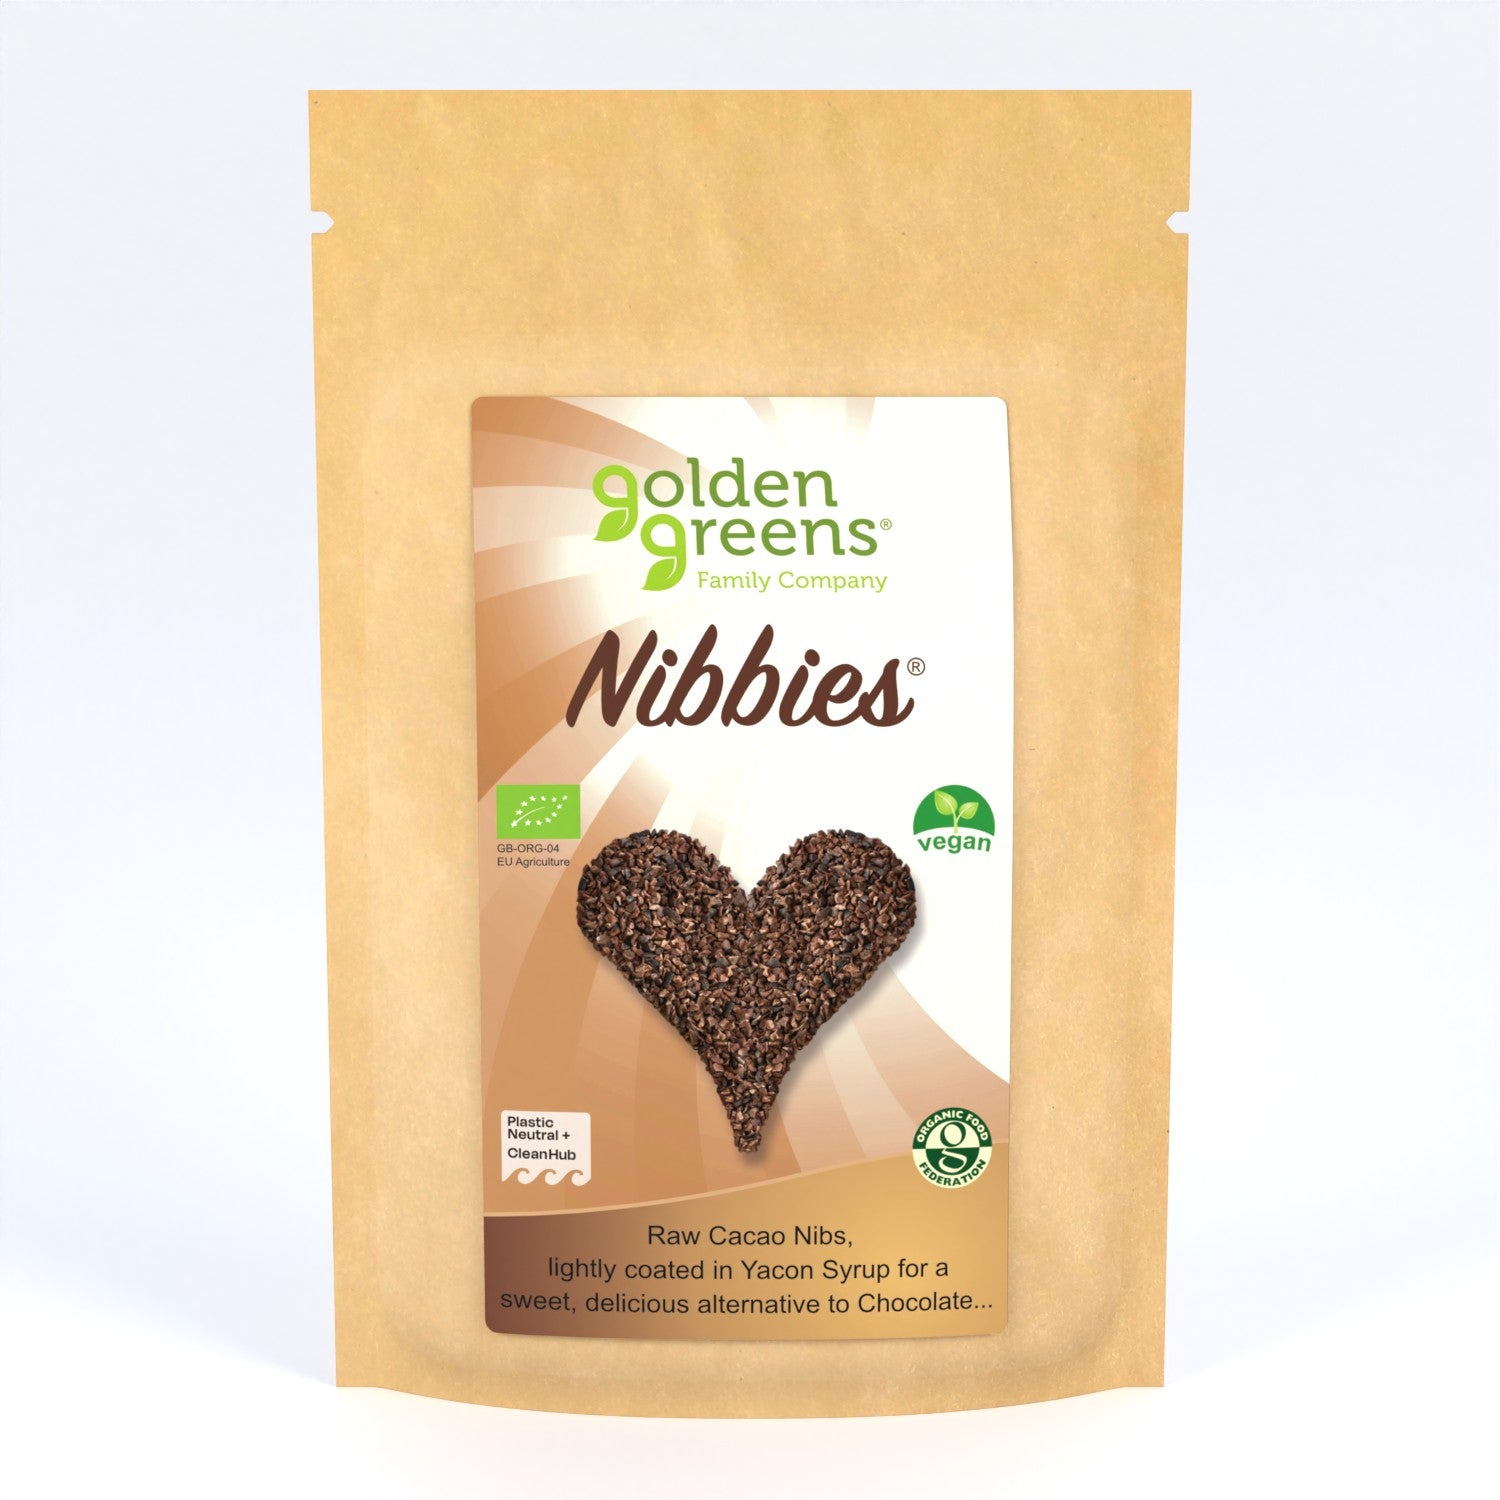 View Nibbies Sweet Cacao Nibs information